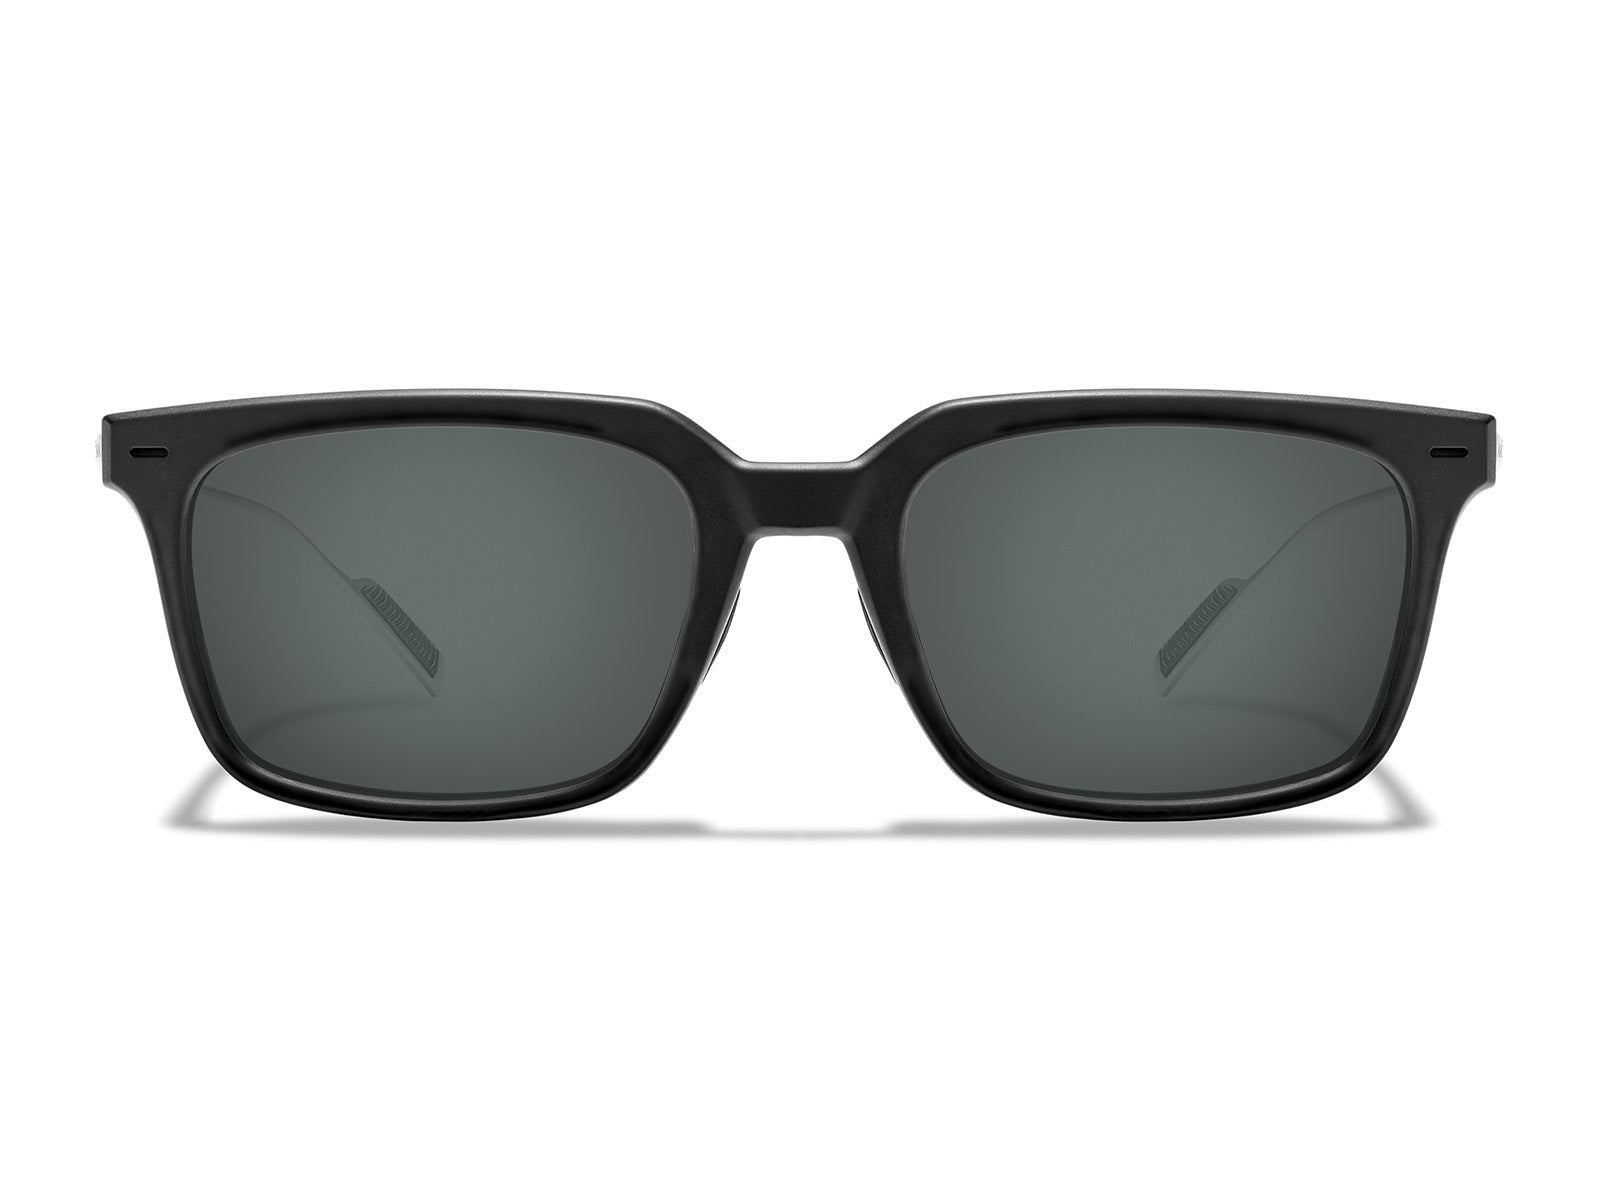 Booker Sunglasses Outlet